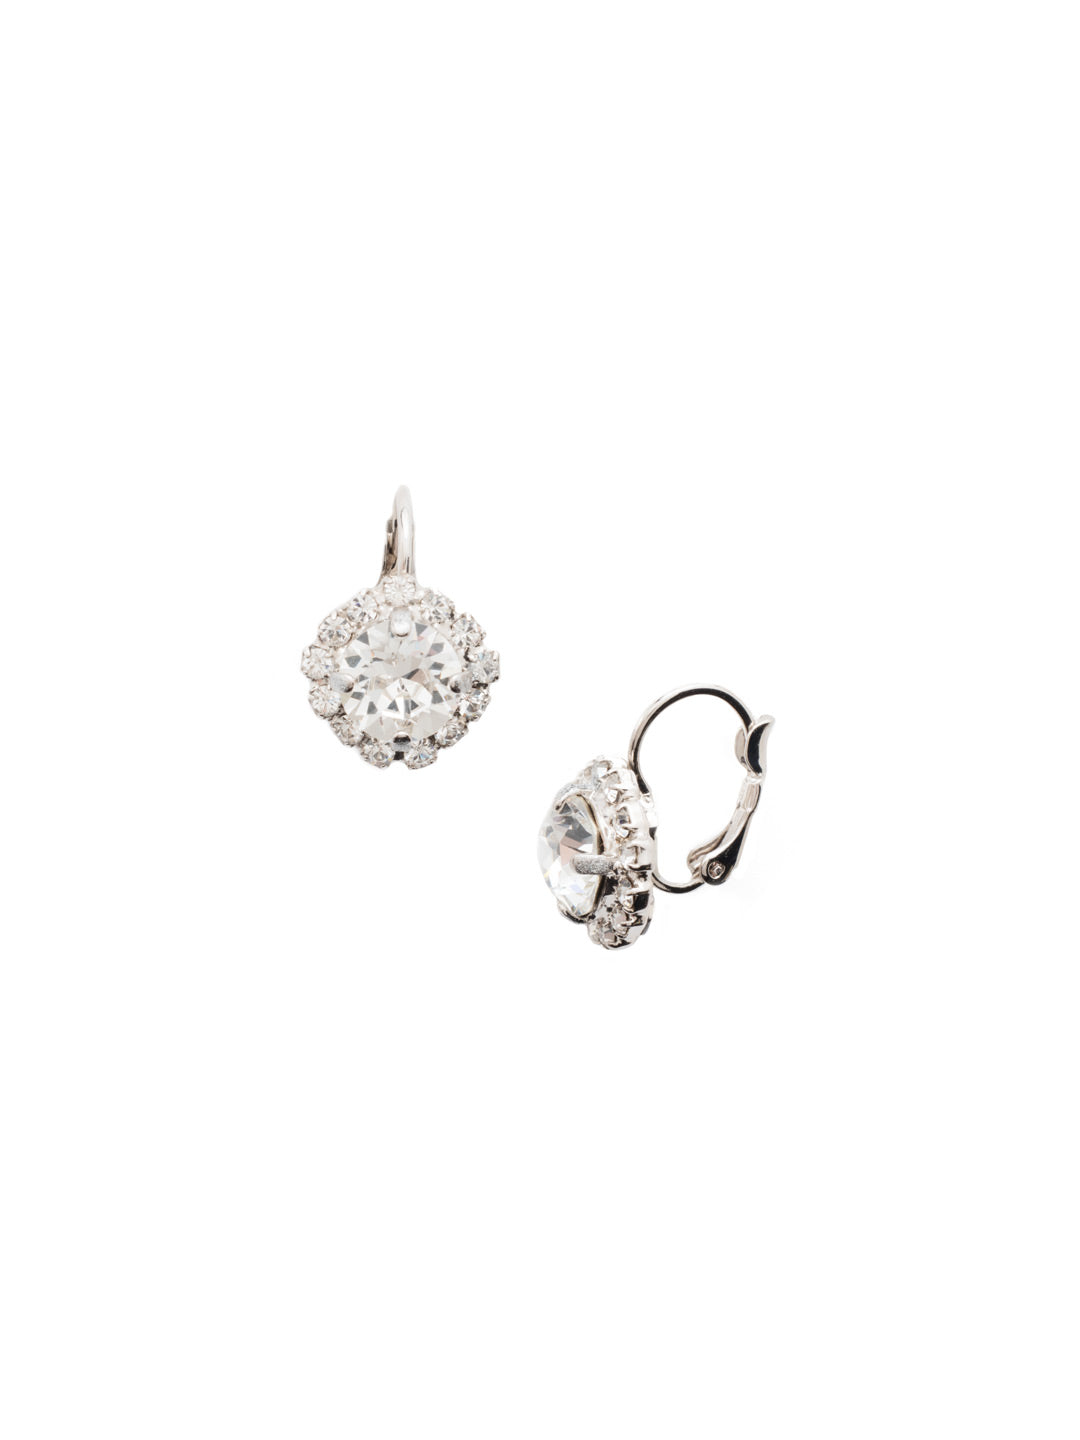 Haute Halo Dangle Earrings - EDL10RHCRY - <p>A central round crystal with an elegant halo of gems embodies elegance and style. From Sorrelli's Crystal collection in our Palladium Silver-tone finish.</p>